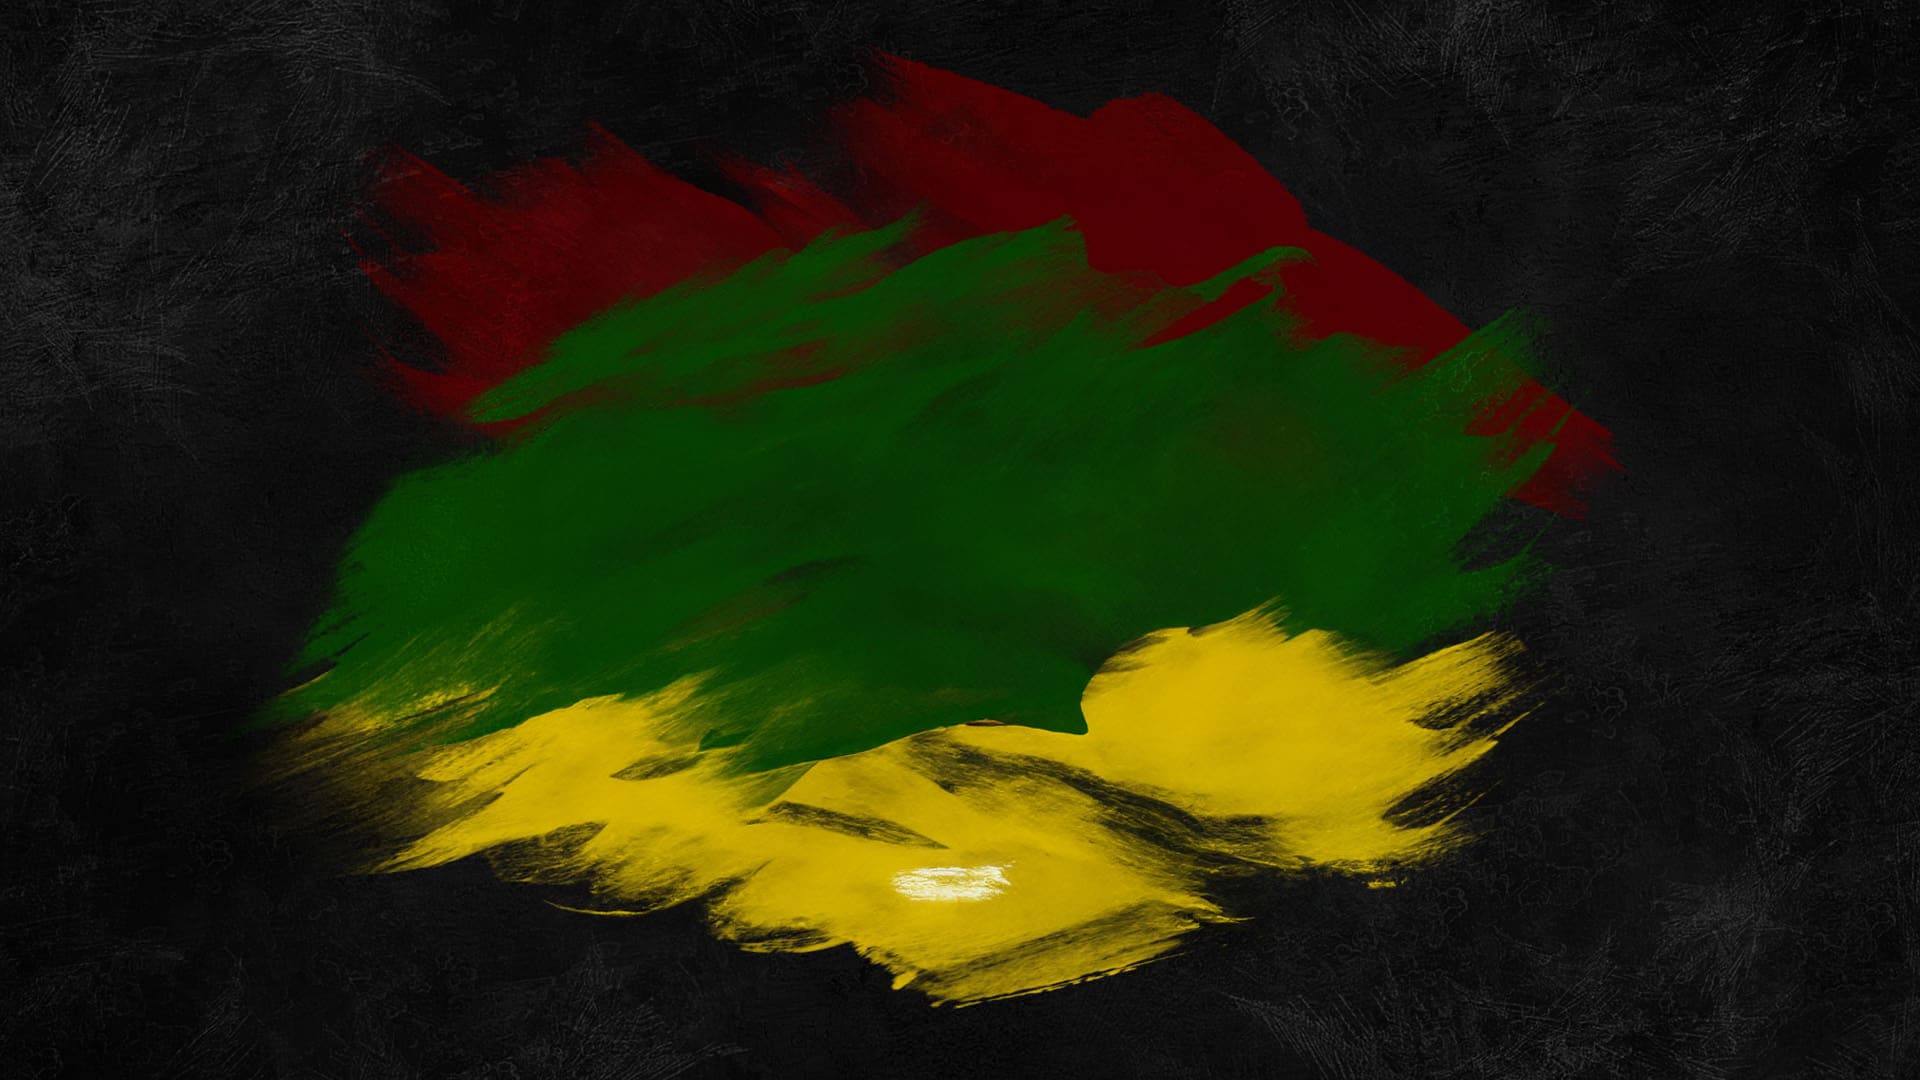 The words "Celebrate Black History Month" in white letters are transposed above a black background with wavy colors of red, green and yellow moving down the image behind the words.